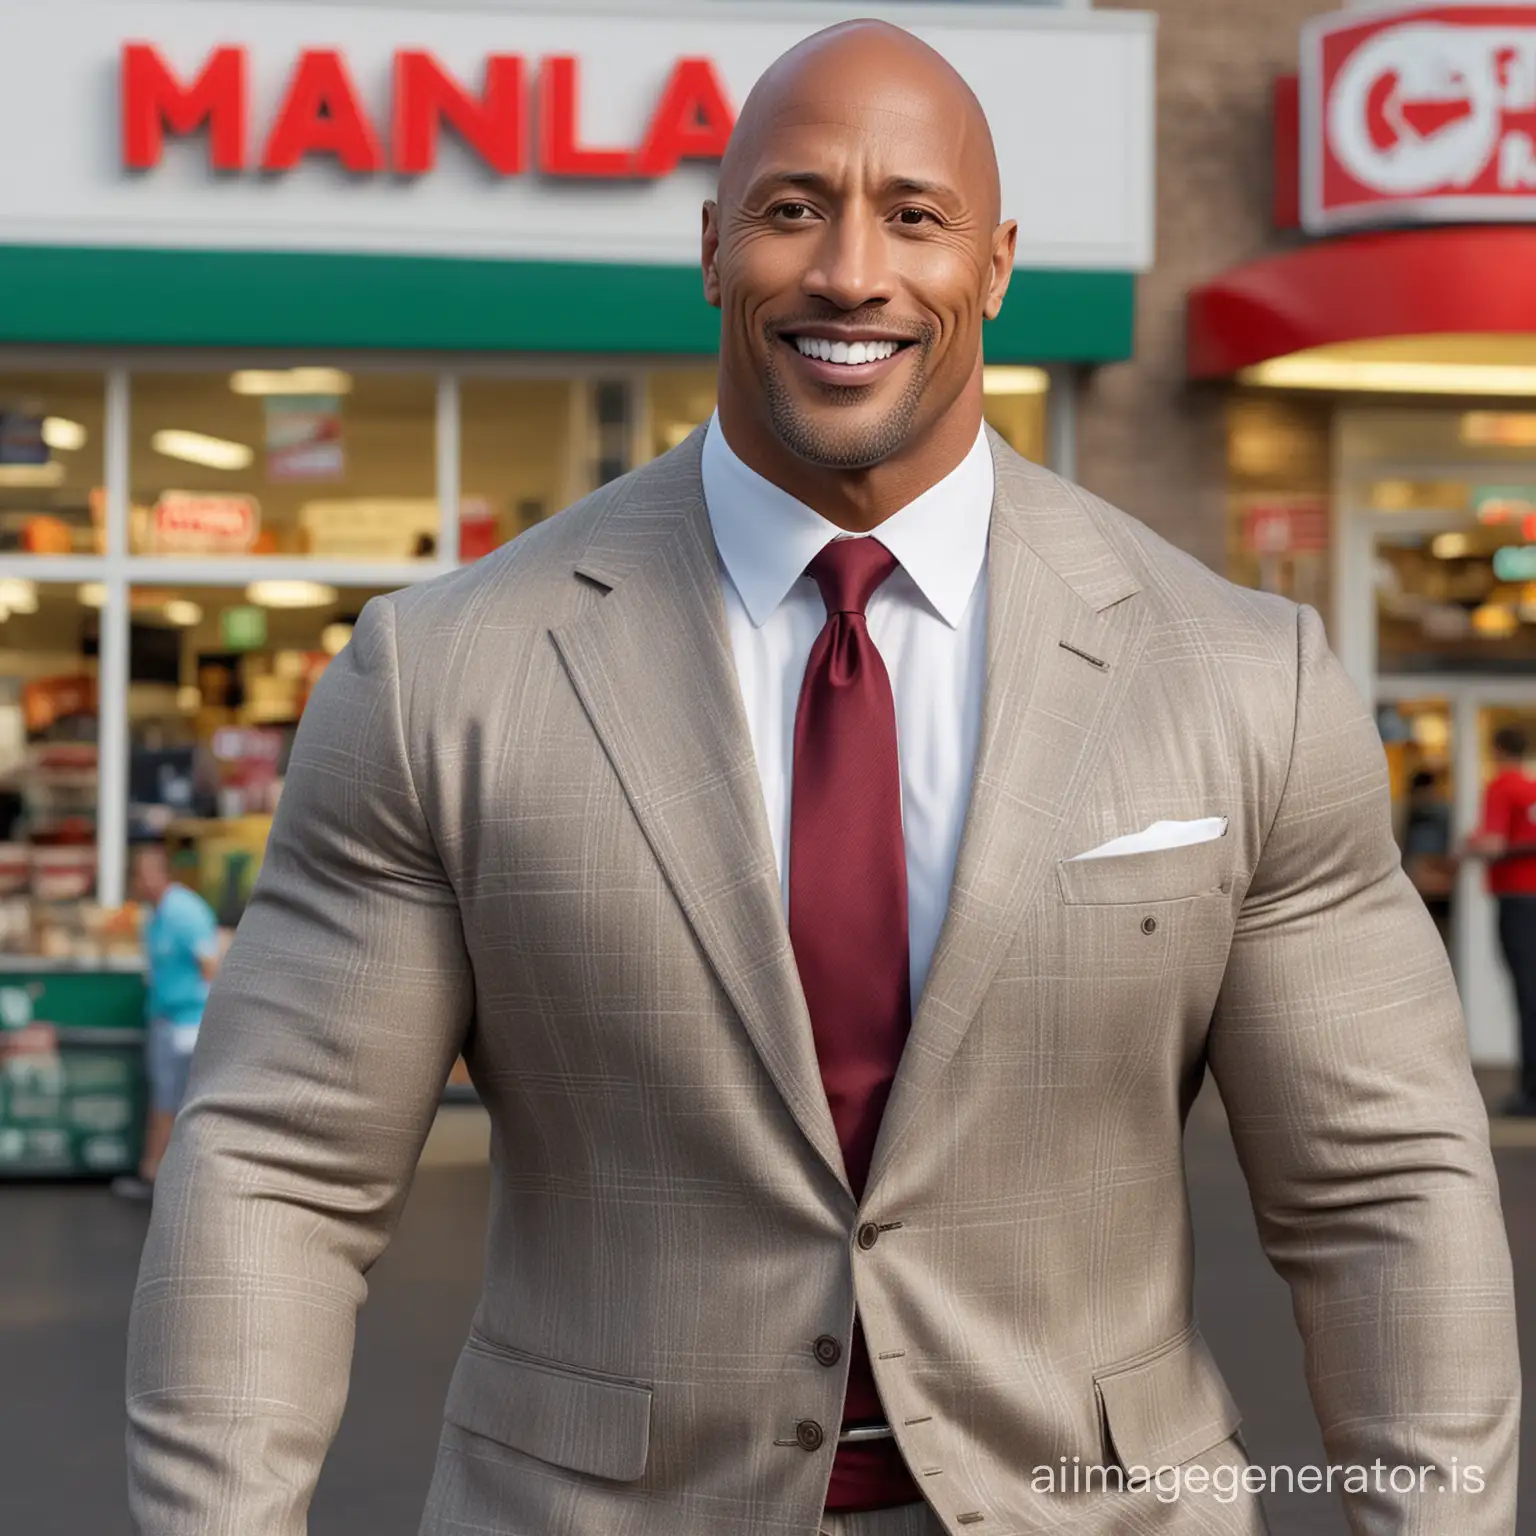 Dwayne Johnson wearing a Donald Macdonald suit, who is smiling and looking at the camera, full body, photorealistic and hyper detailed, is located outside a Macdonald food store as the background